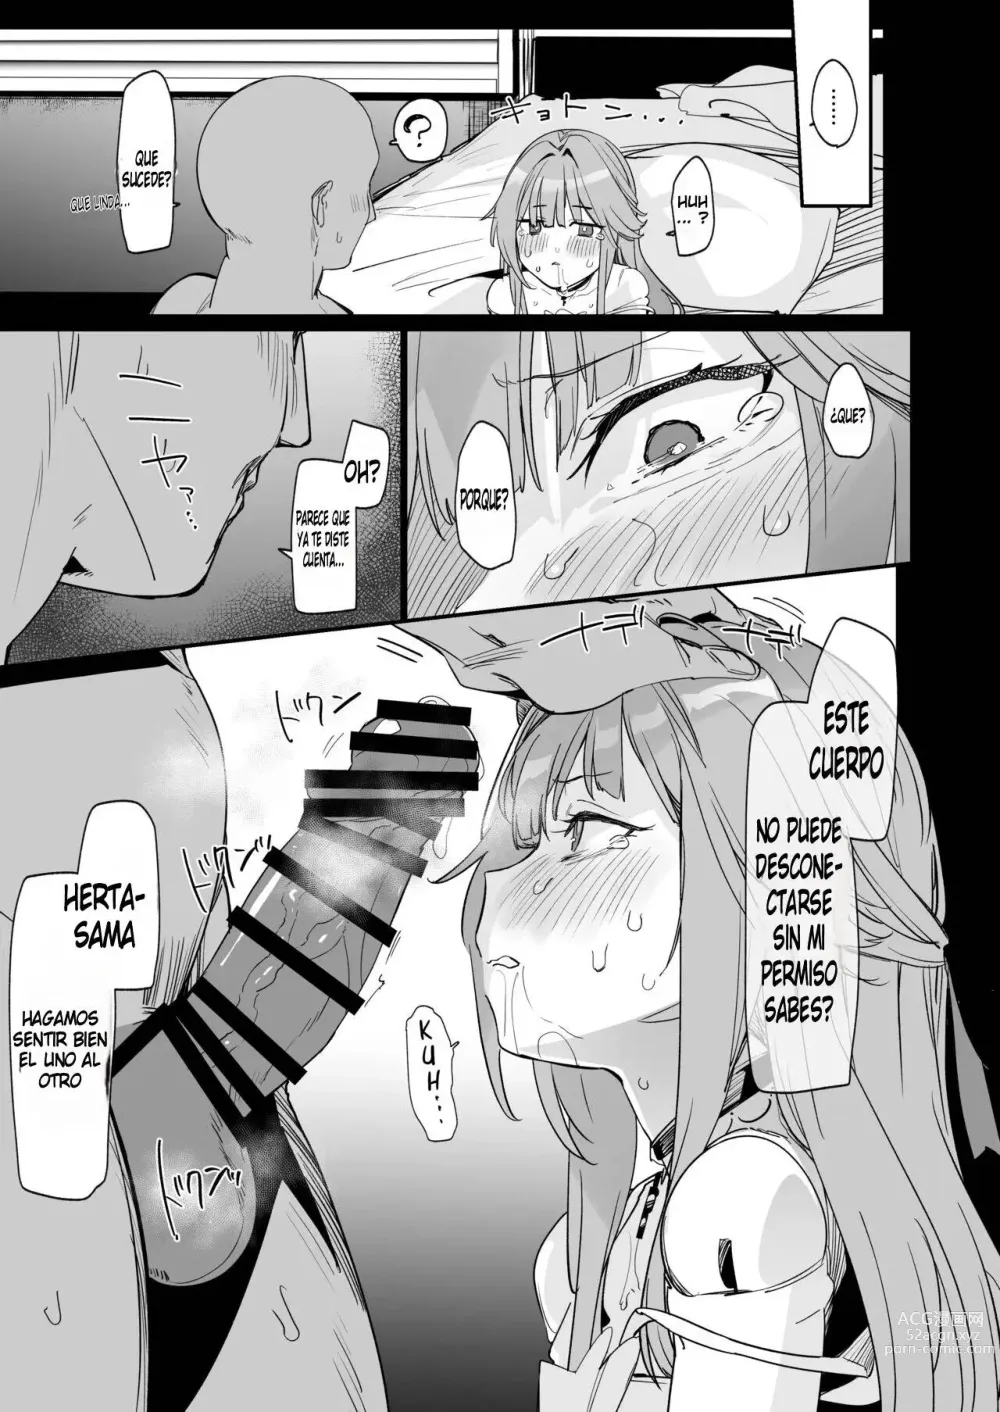 Page 10 of doujinshi The Story Where Madame Herta’s Perfection Goes POOF!